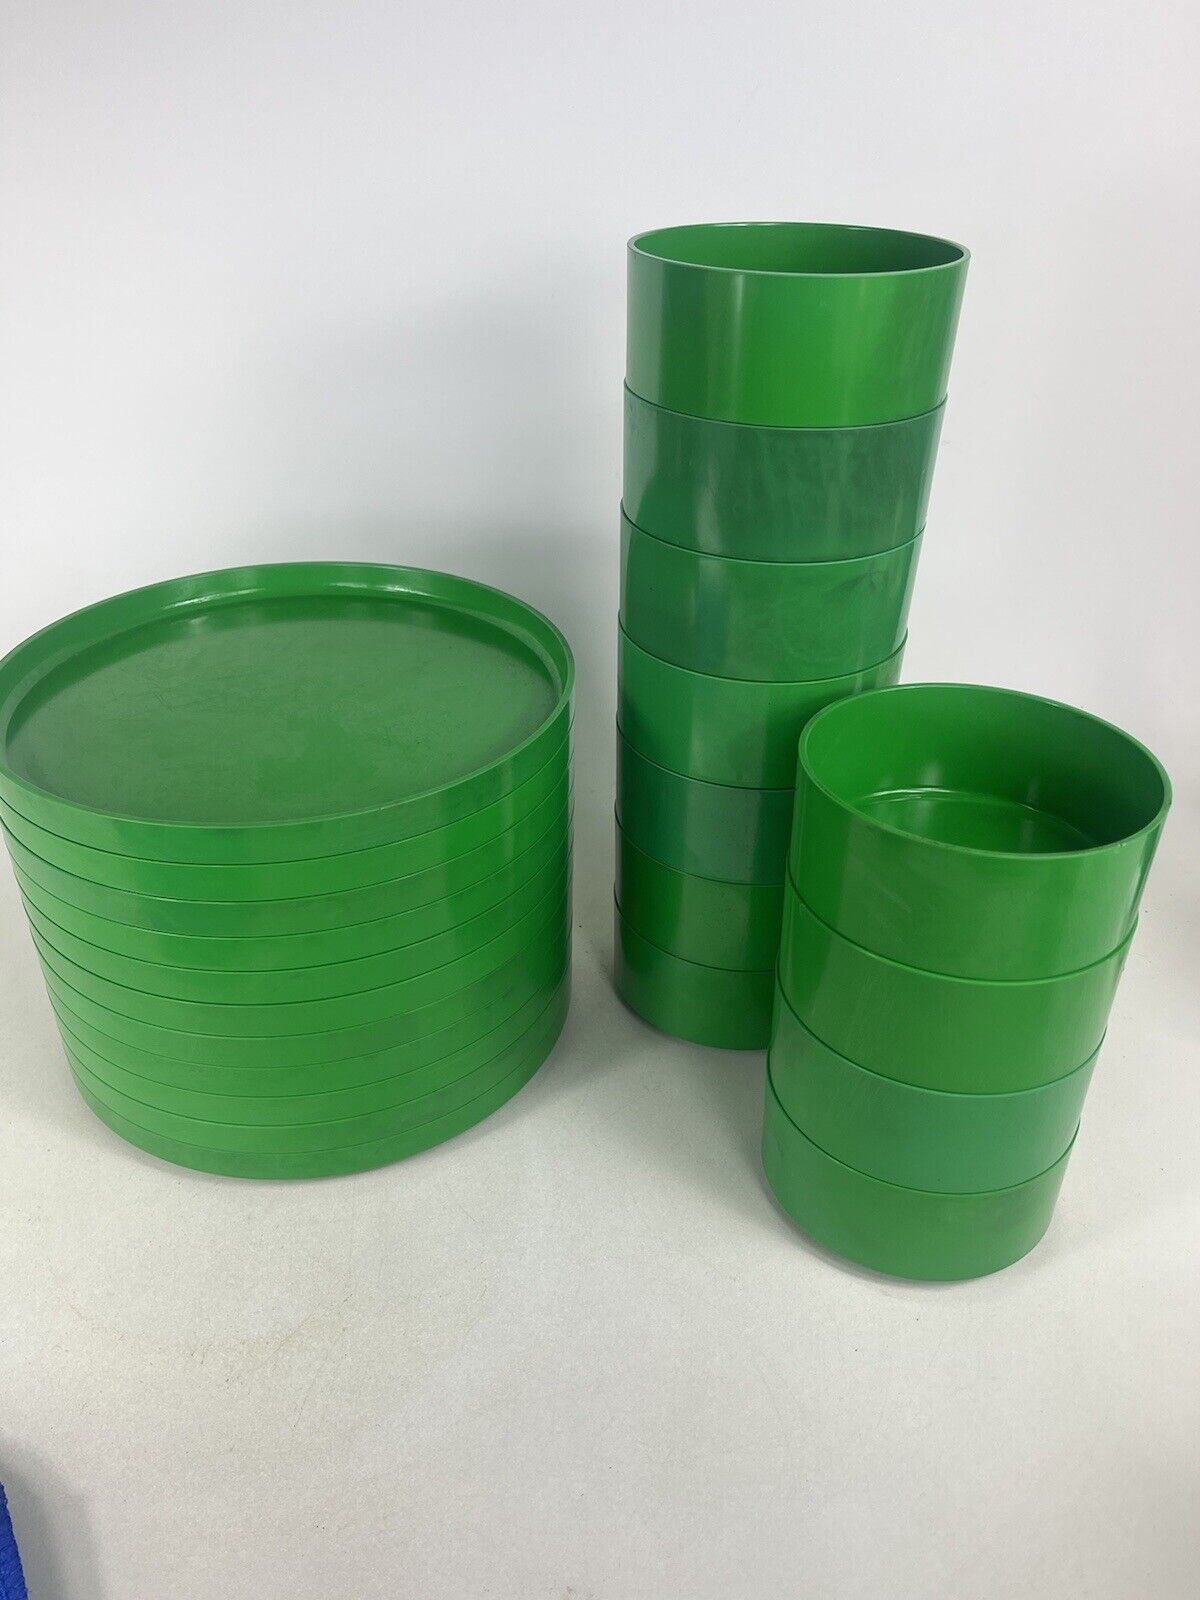 Heller by Massimo Vignelli 10” Green Dinner Plates And 5” Bowls Stackable Vtg